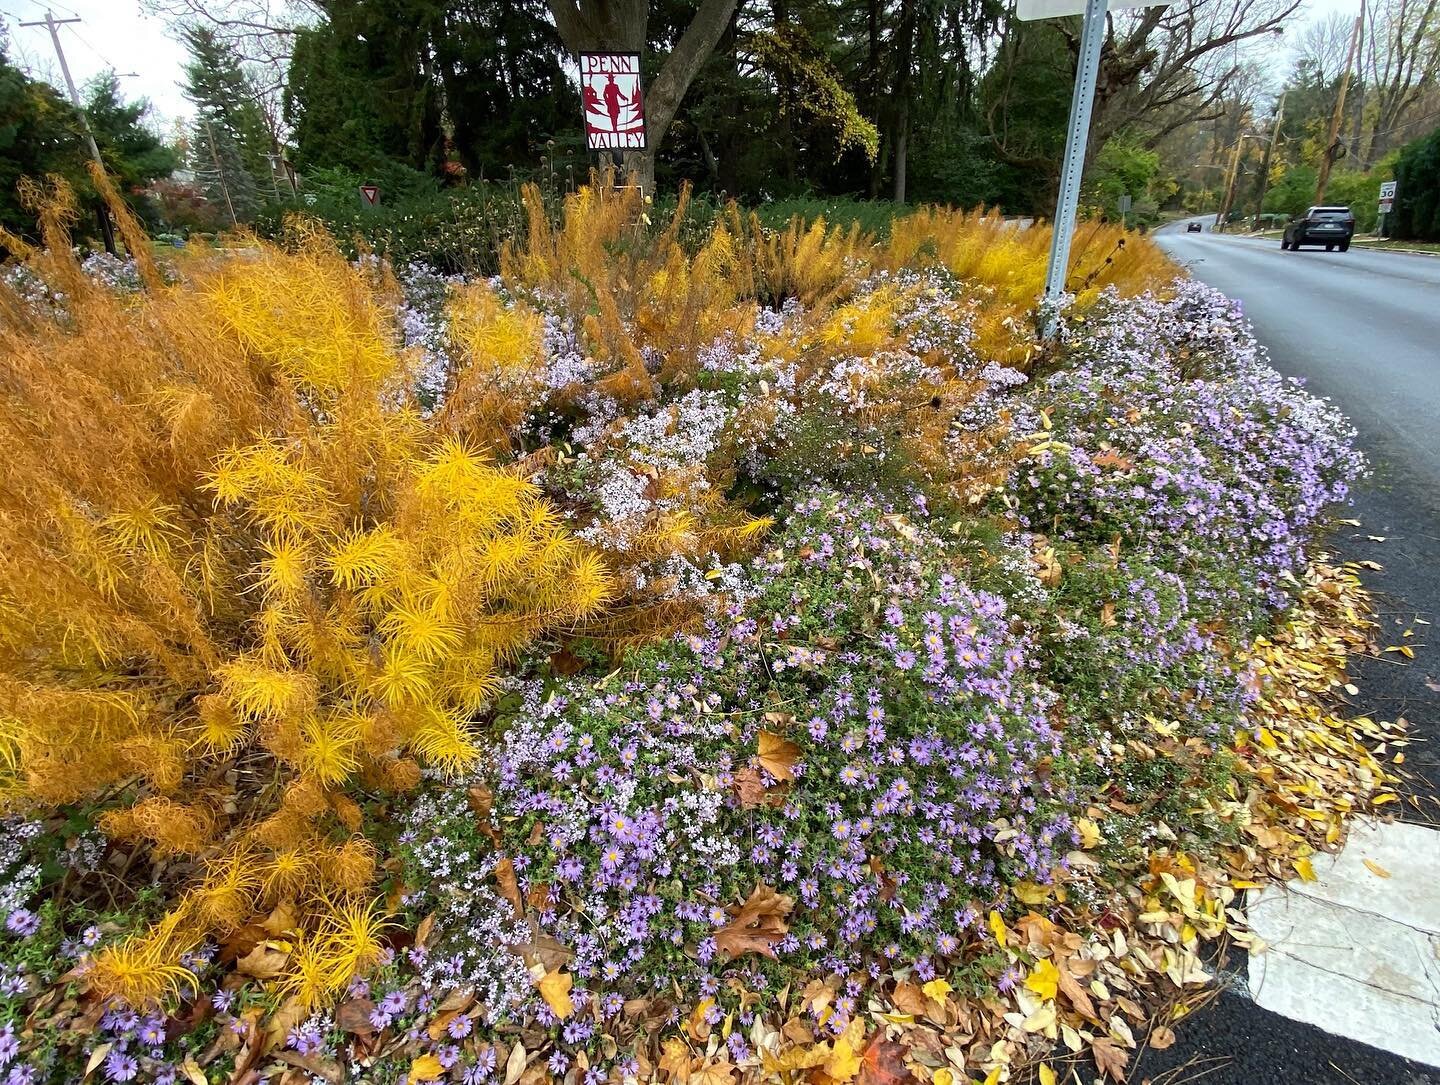 Aromatic and blue wood asters explode with blooms in this public traffic island that I&rsquo;ve stewarded for almost 7 years. Late season warmth encourages continuous flowering, and the plants still buzz with bees. I&rsquo;m able to leave all of the 